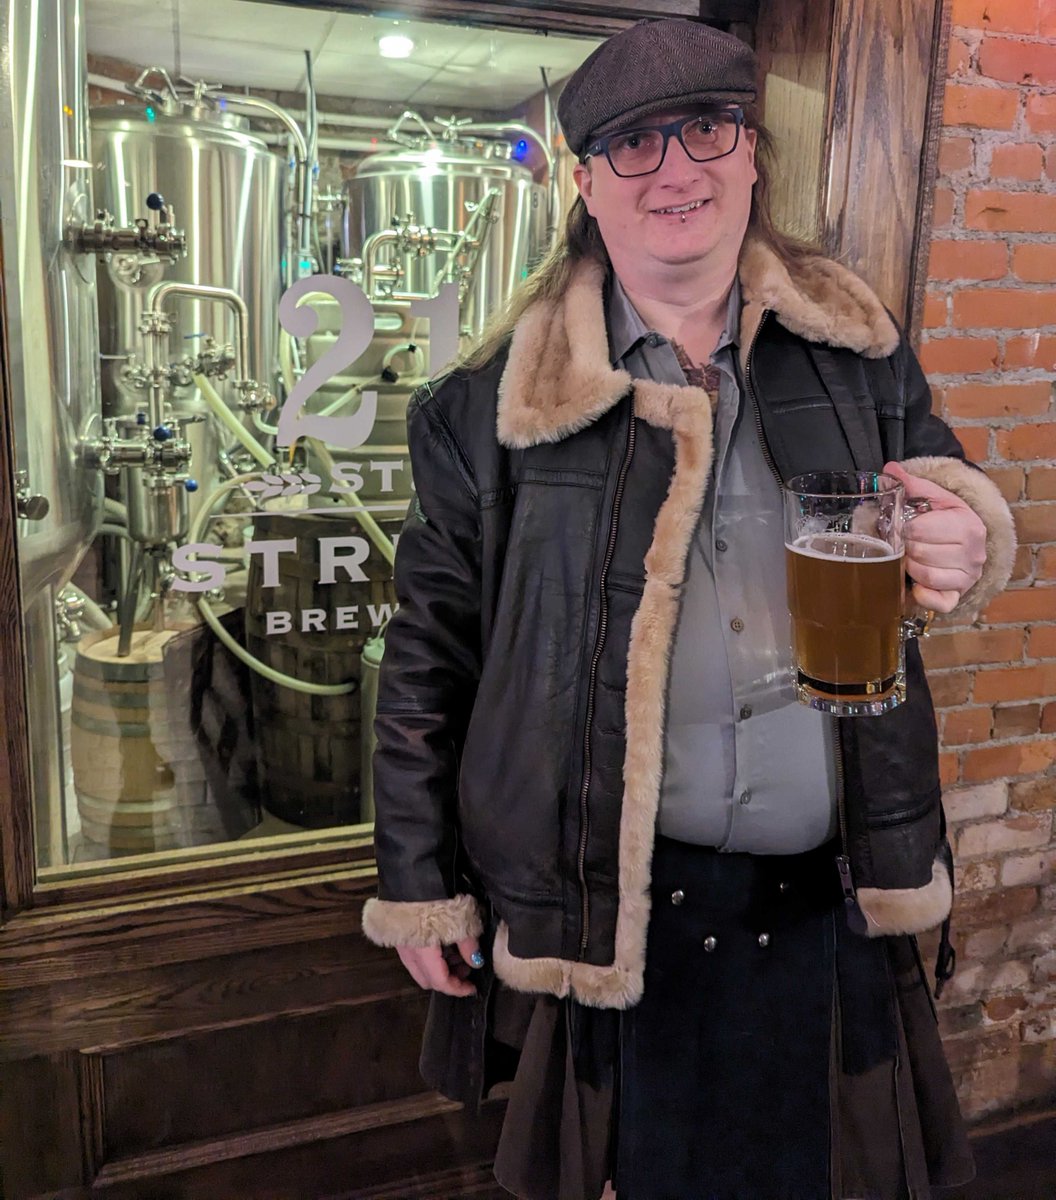 #BehindTheLight Wil Buell, CLS infrastructure analyst, has had a passion for great-tasting beer since his early 20s, when he discovered a whole wide world of interesting flavors besides the stuff his dad liked to drink. @RebBrewRegina @SaskHeadhunters 🔎 bit.ly/3VRFk0K